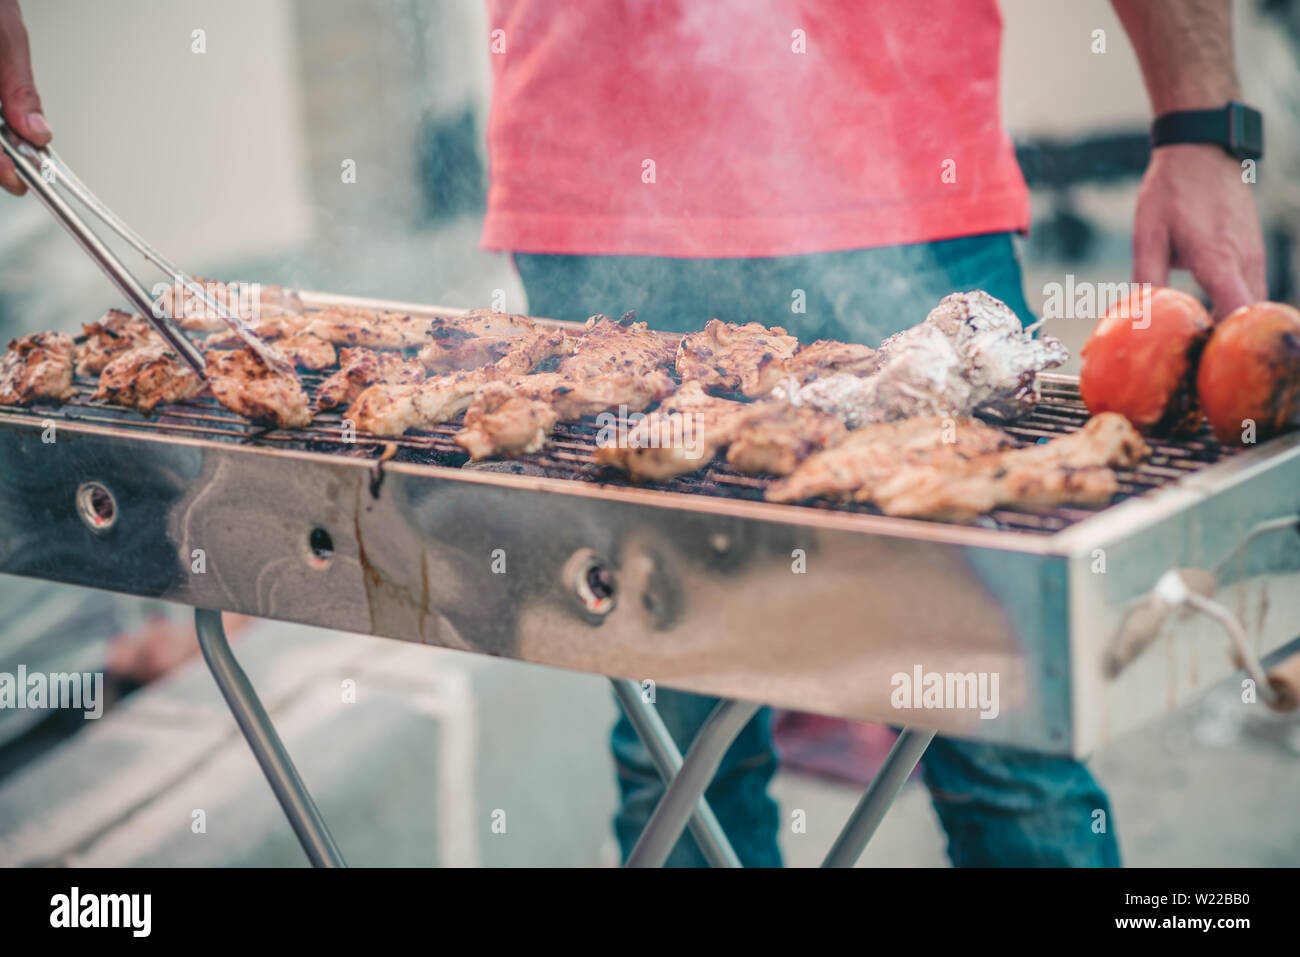 Handsome athletic man cooking barbecue outdoors. Brutal man with jeans and red shirt standing and prepared meat on a courtyard. Stock Photo